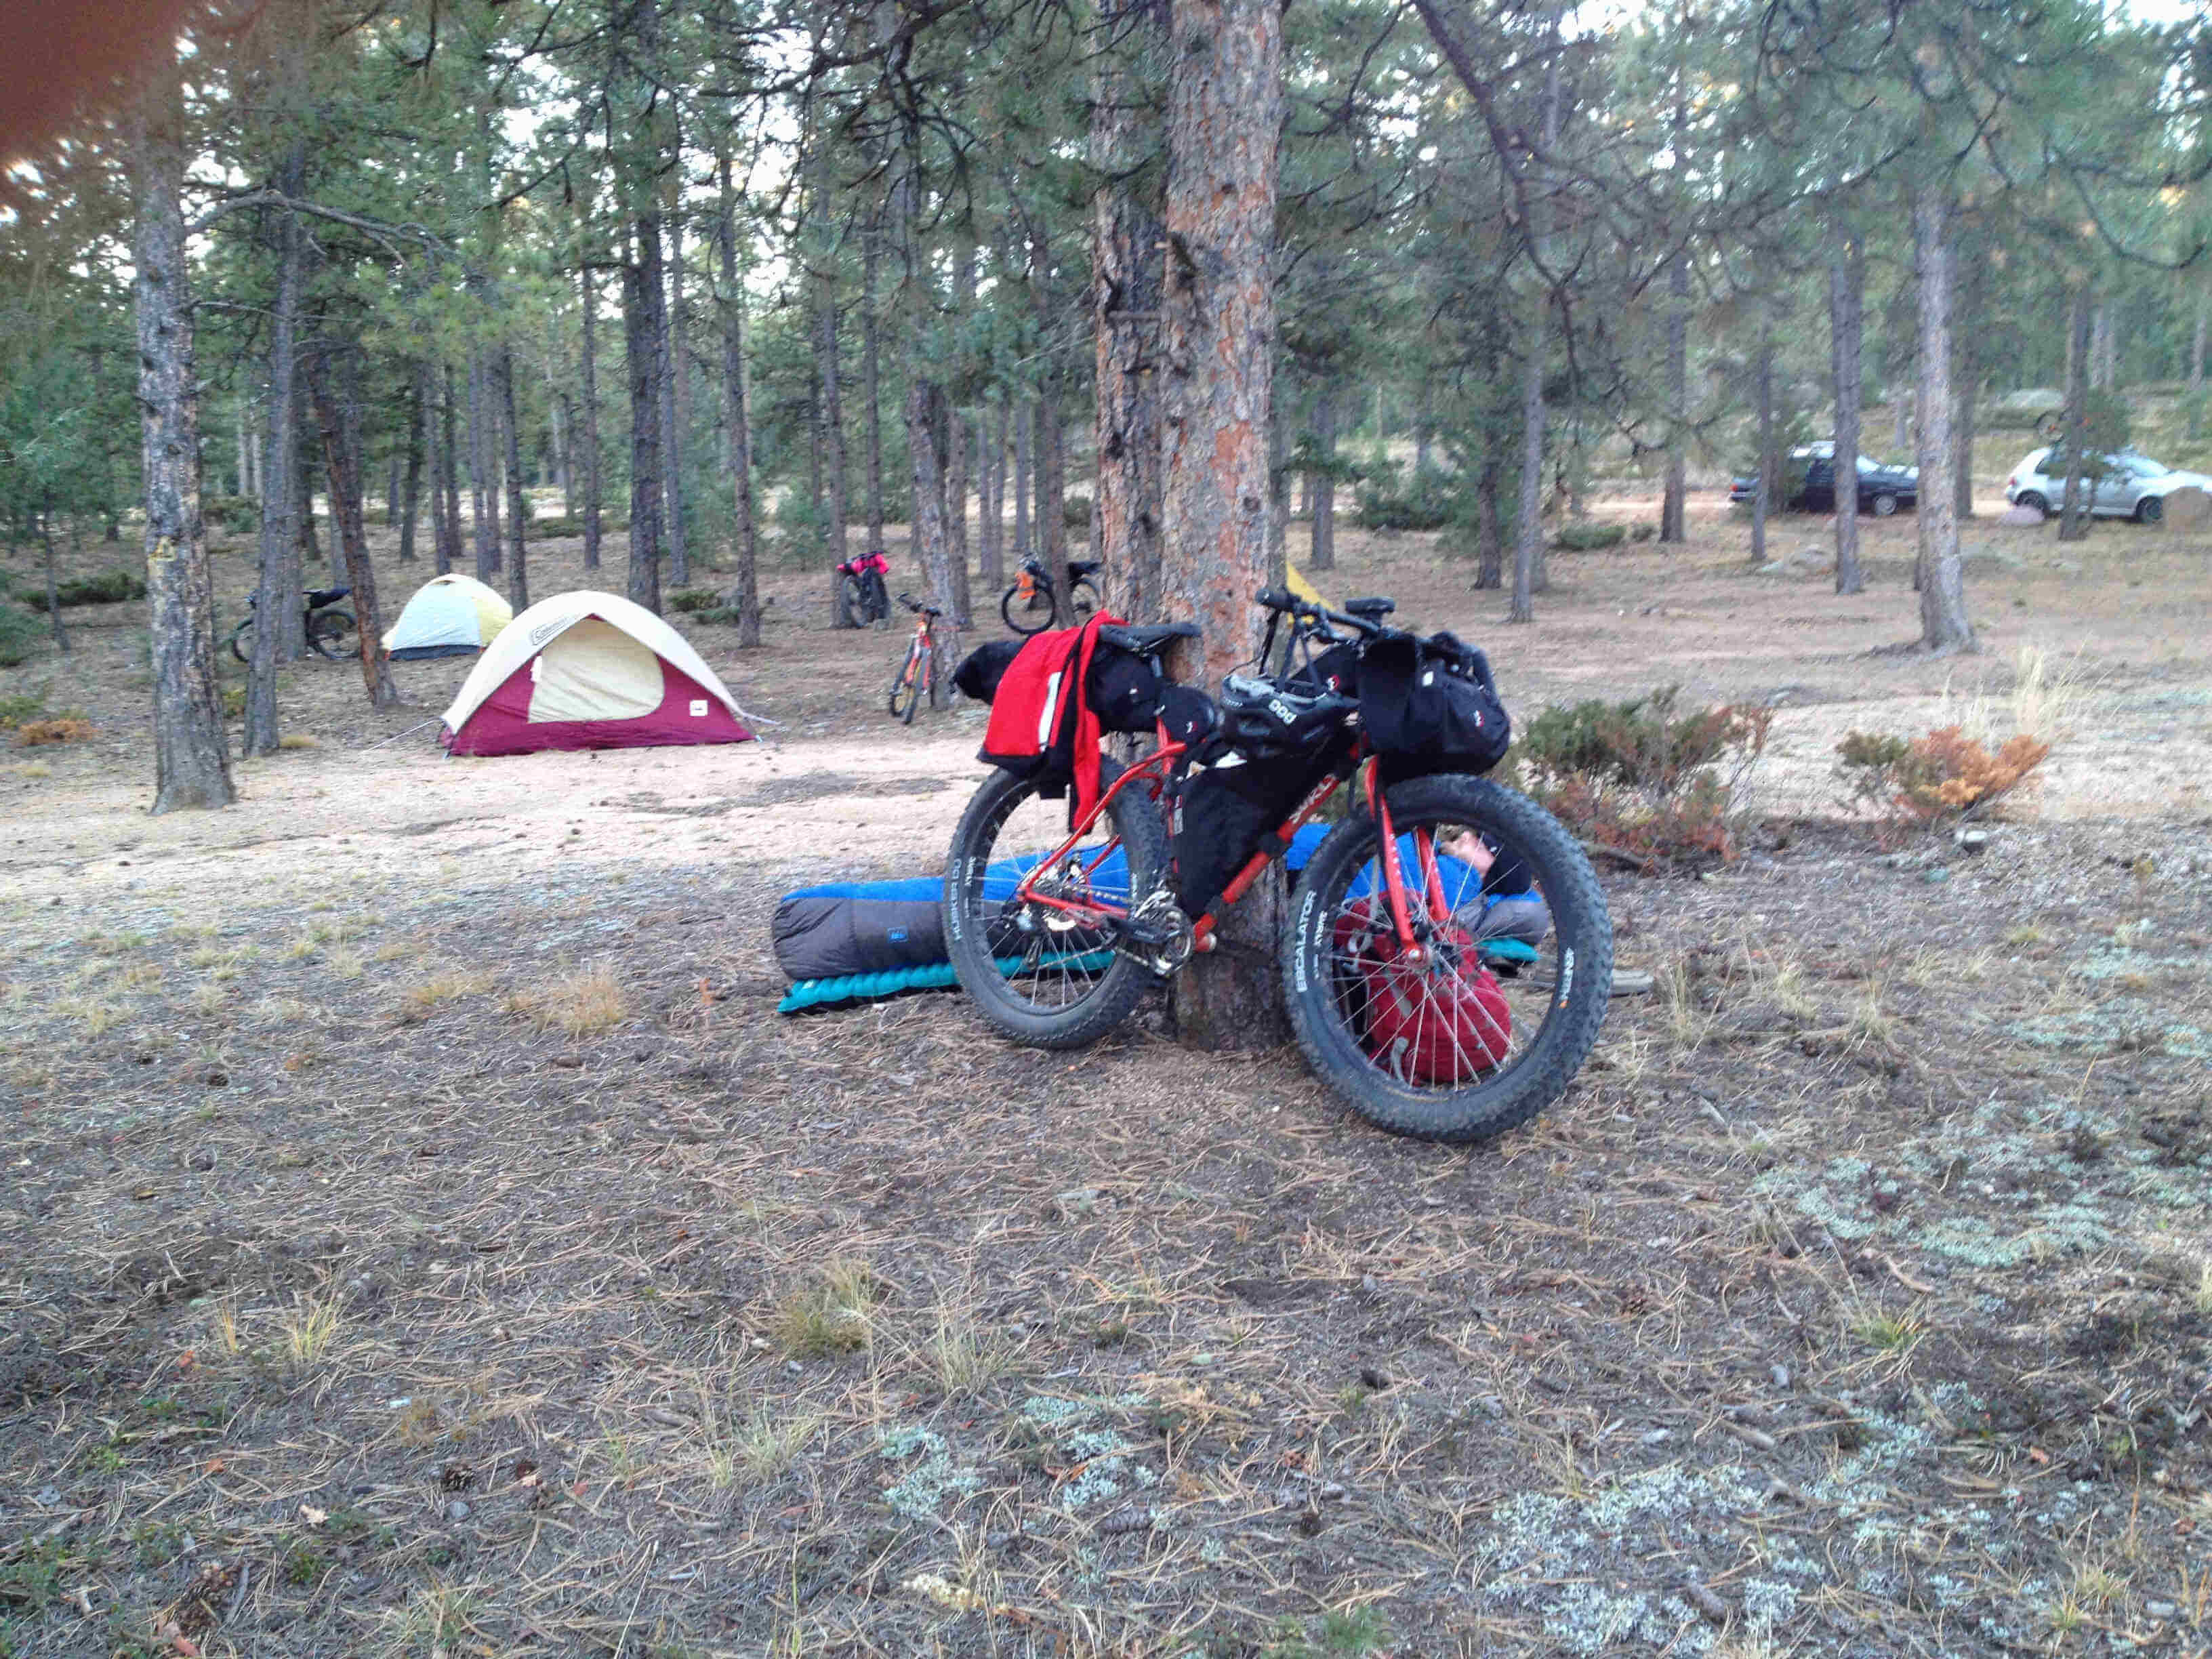 Right side view of a red Surly fat bike with gear, leaning against a tree in a forest, with tents set up behind it